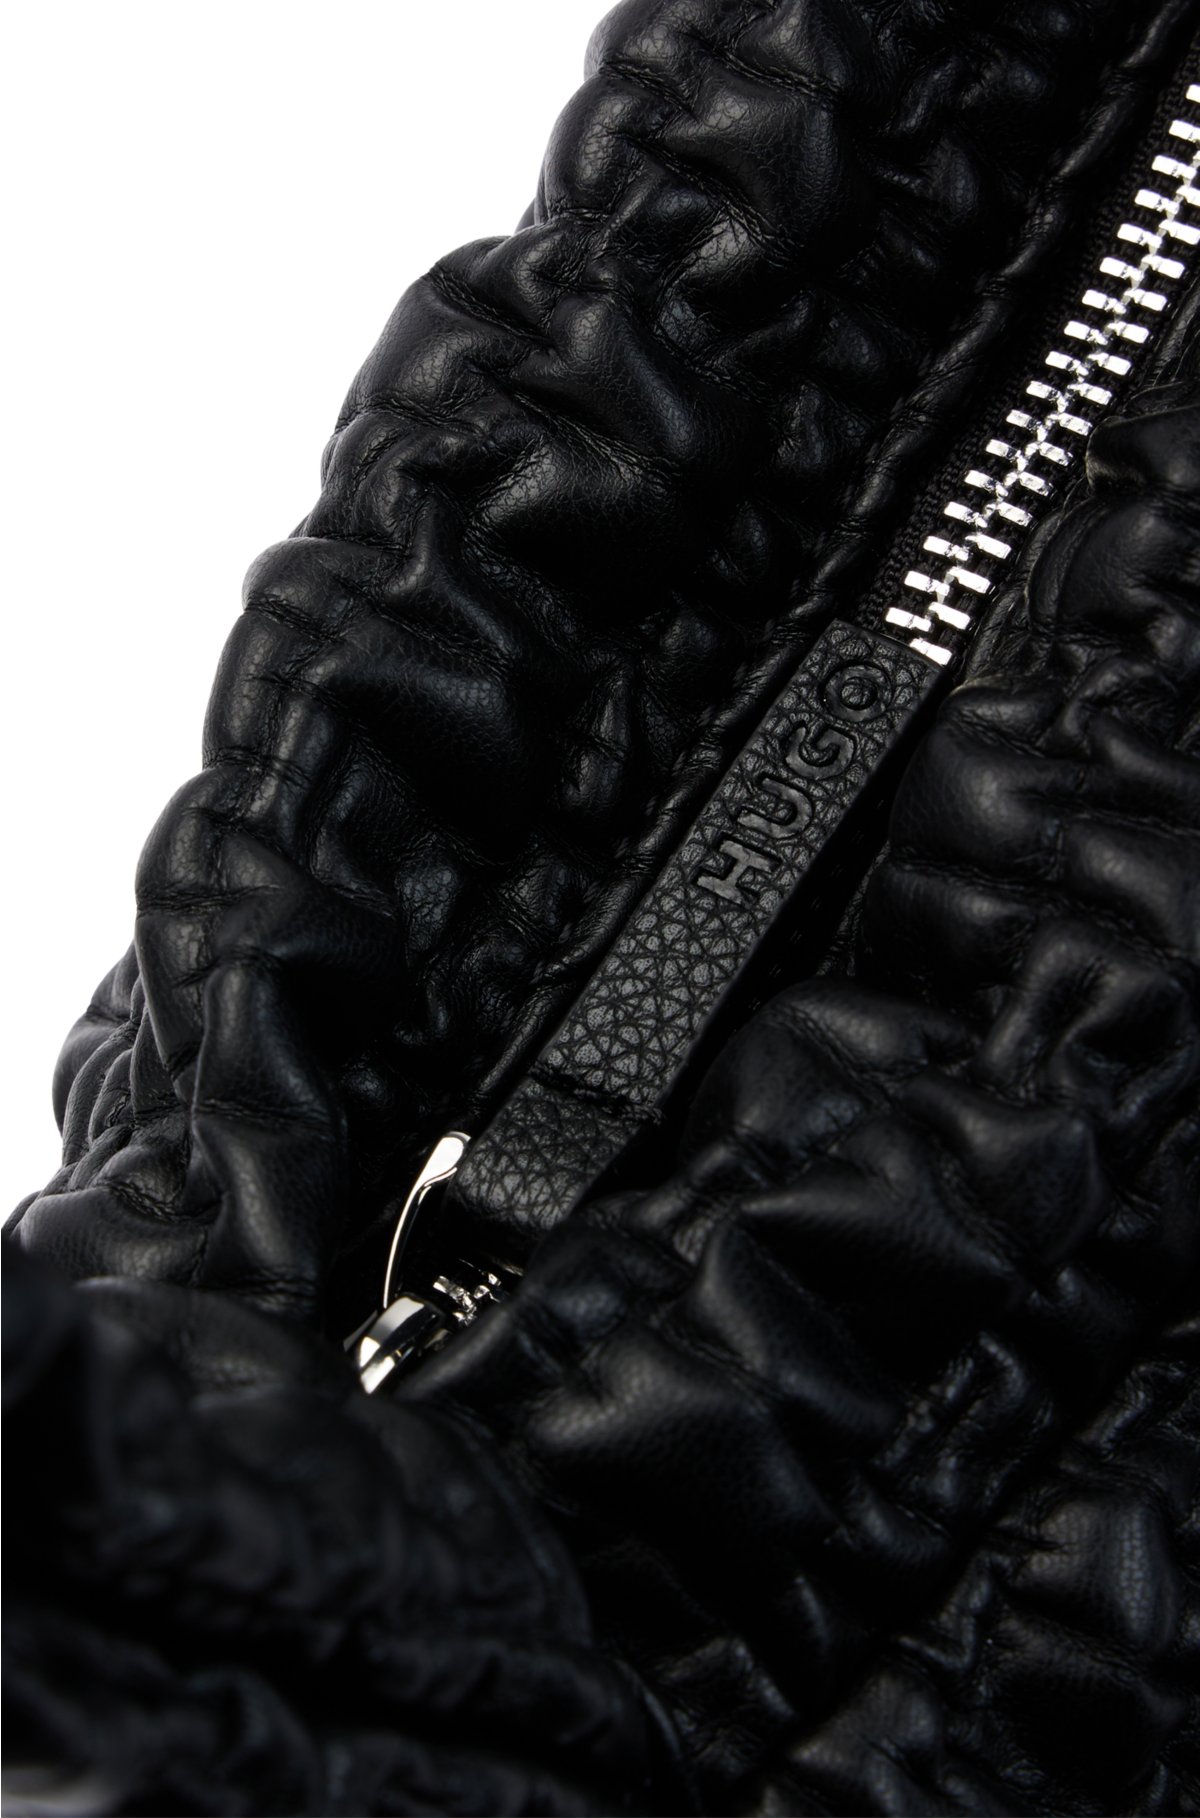 Shoulder bag in quilted-effect faux leather, Black